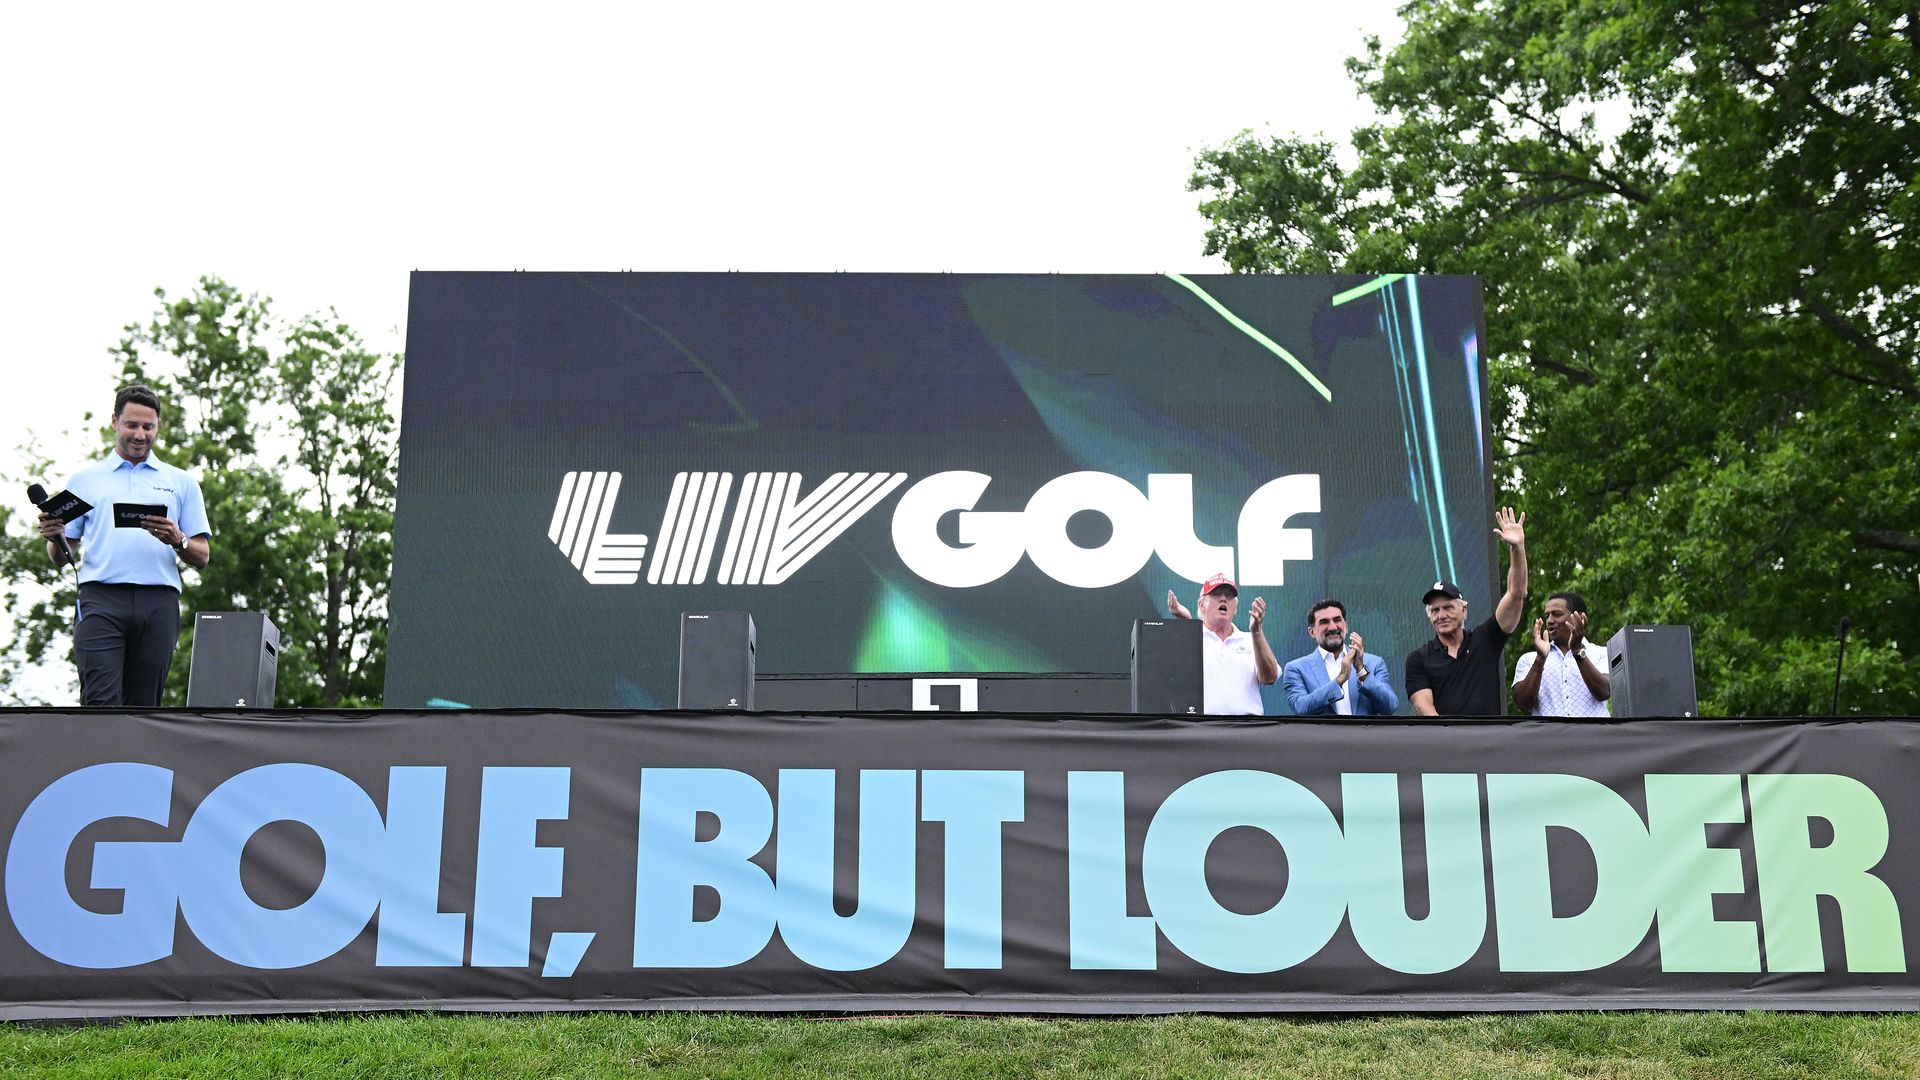 pga tour deal 6 months later; why liv golf is not going anywhere and never was